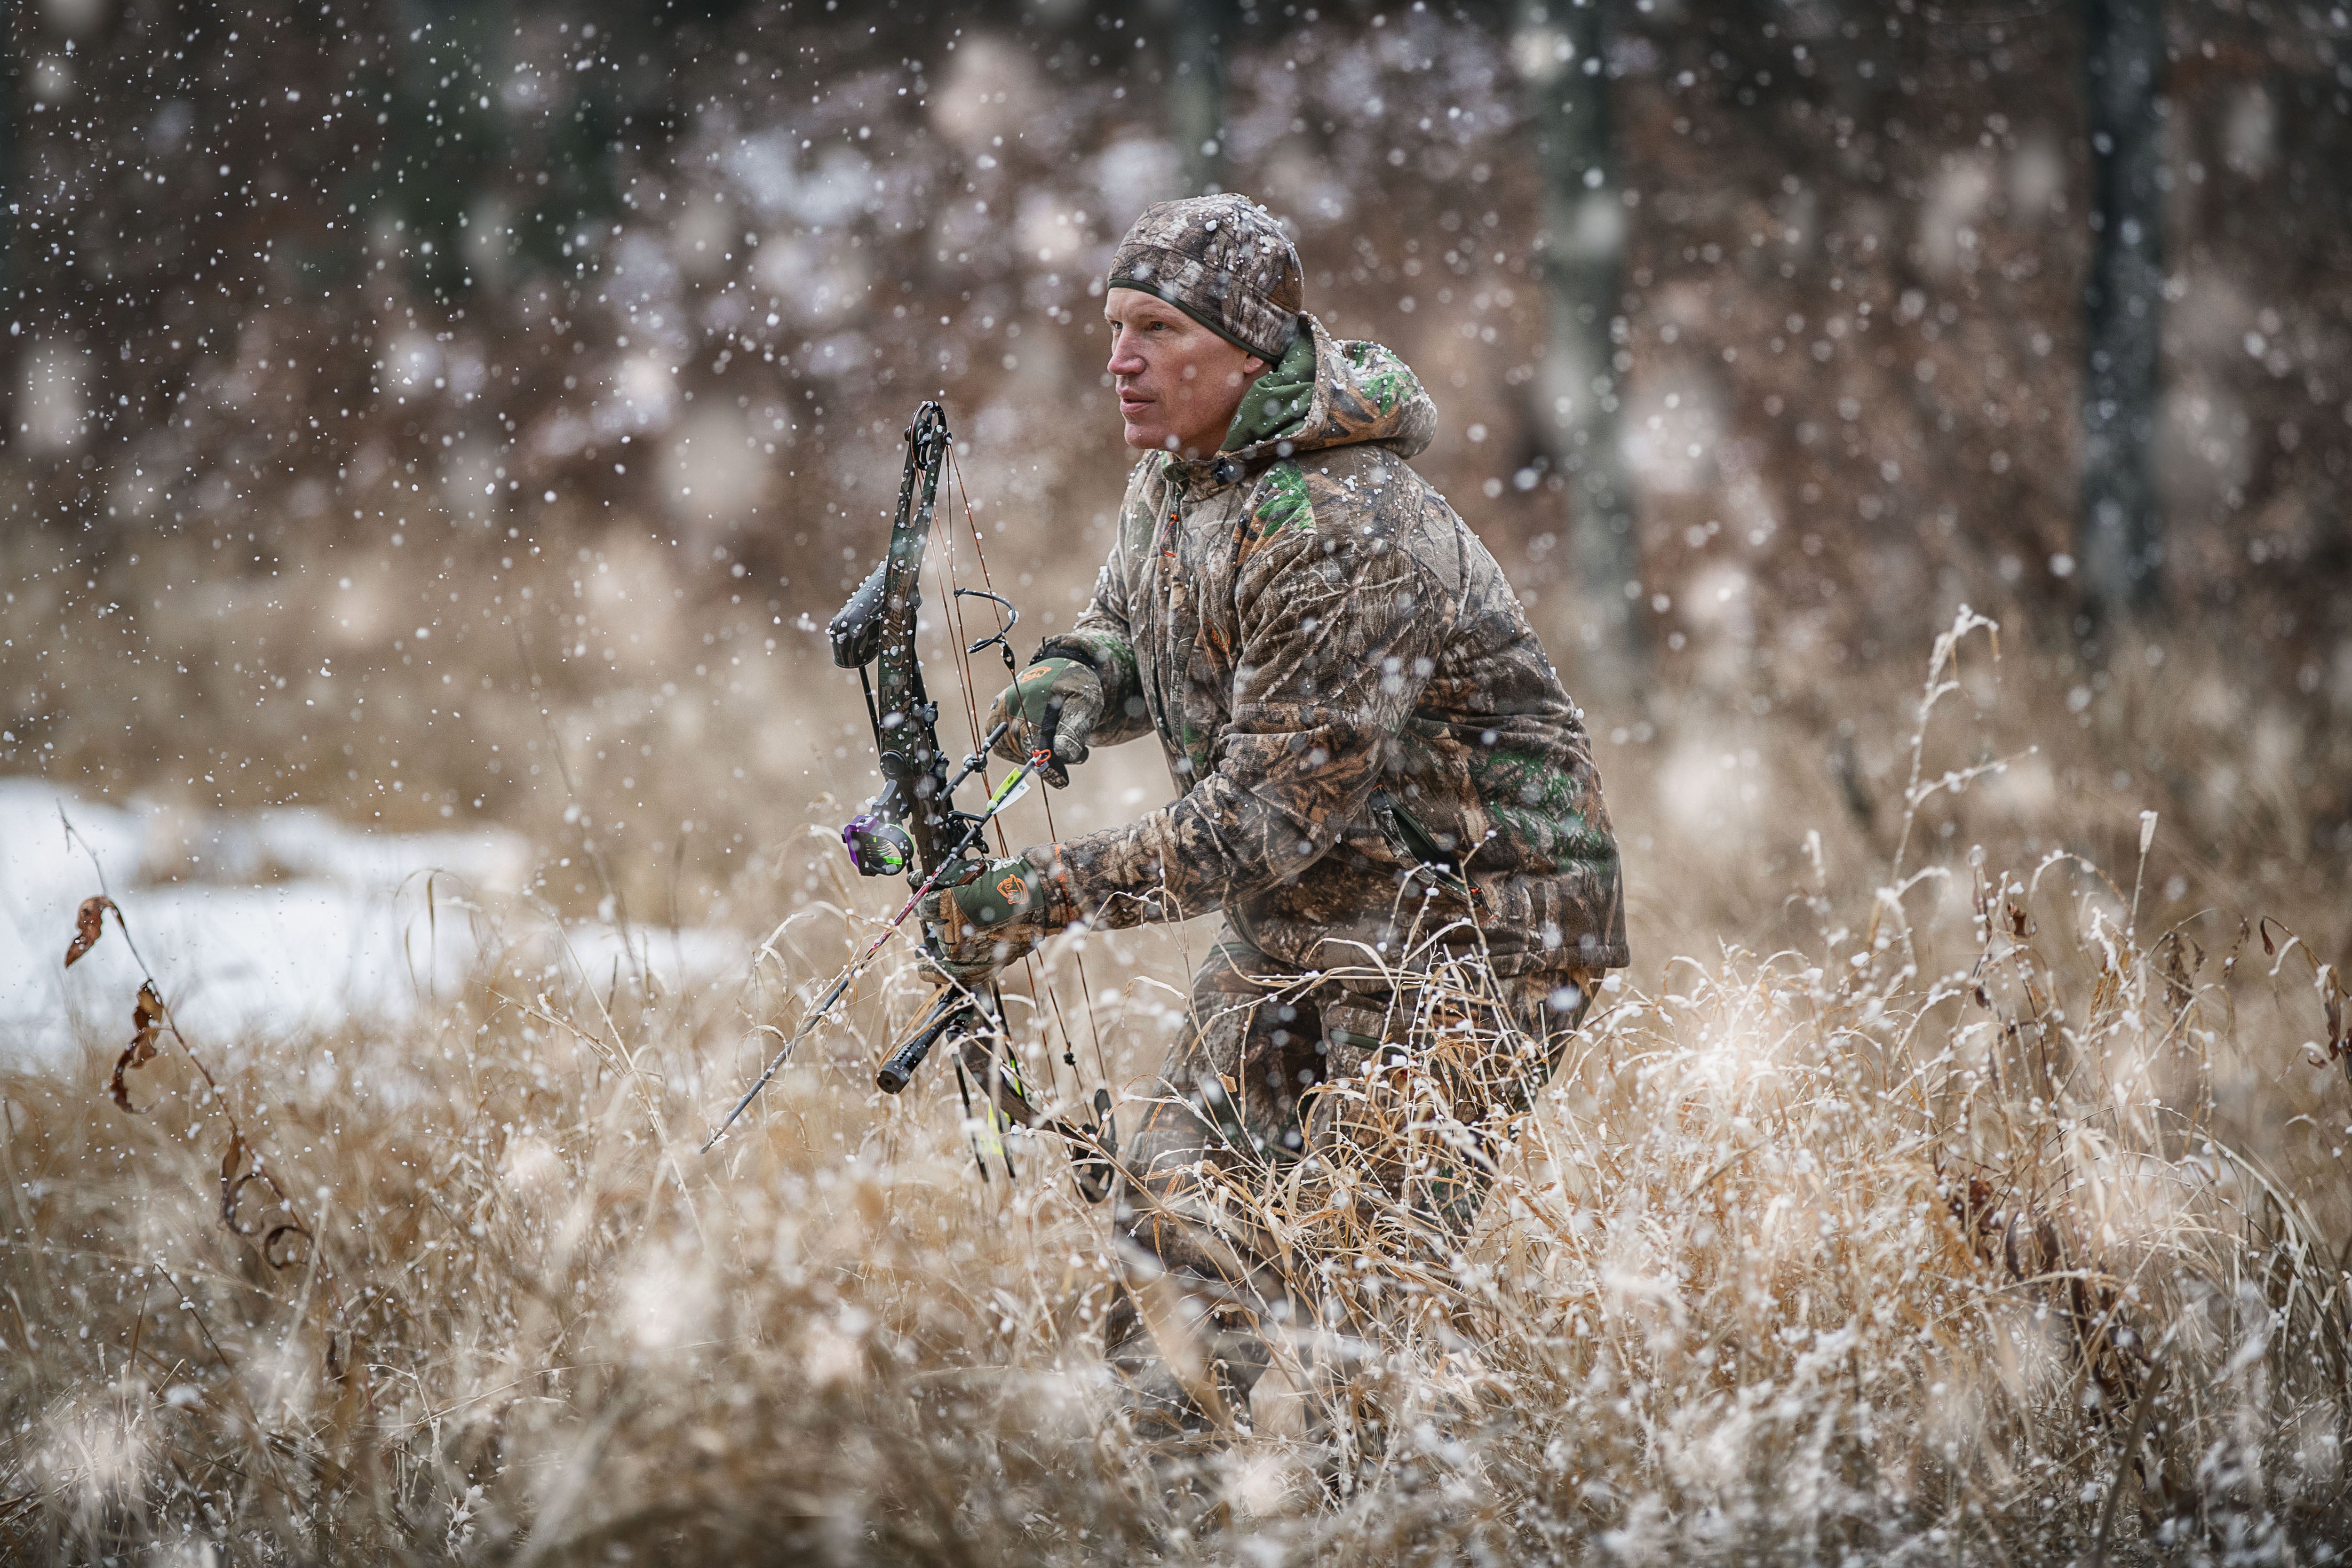 ArcticShield Hunting Gear, Jackets, Bibs & More | Stay Out Longer